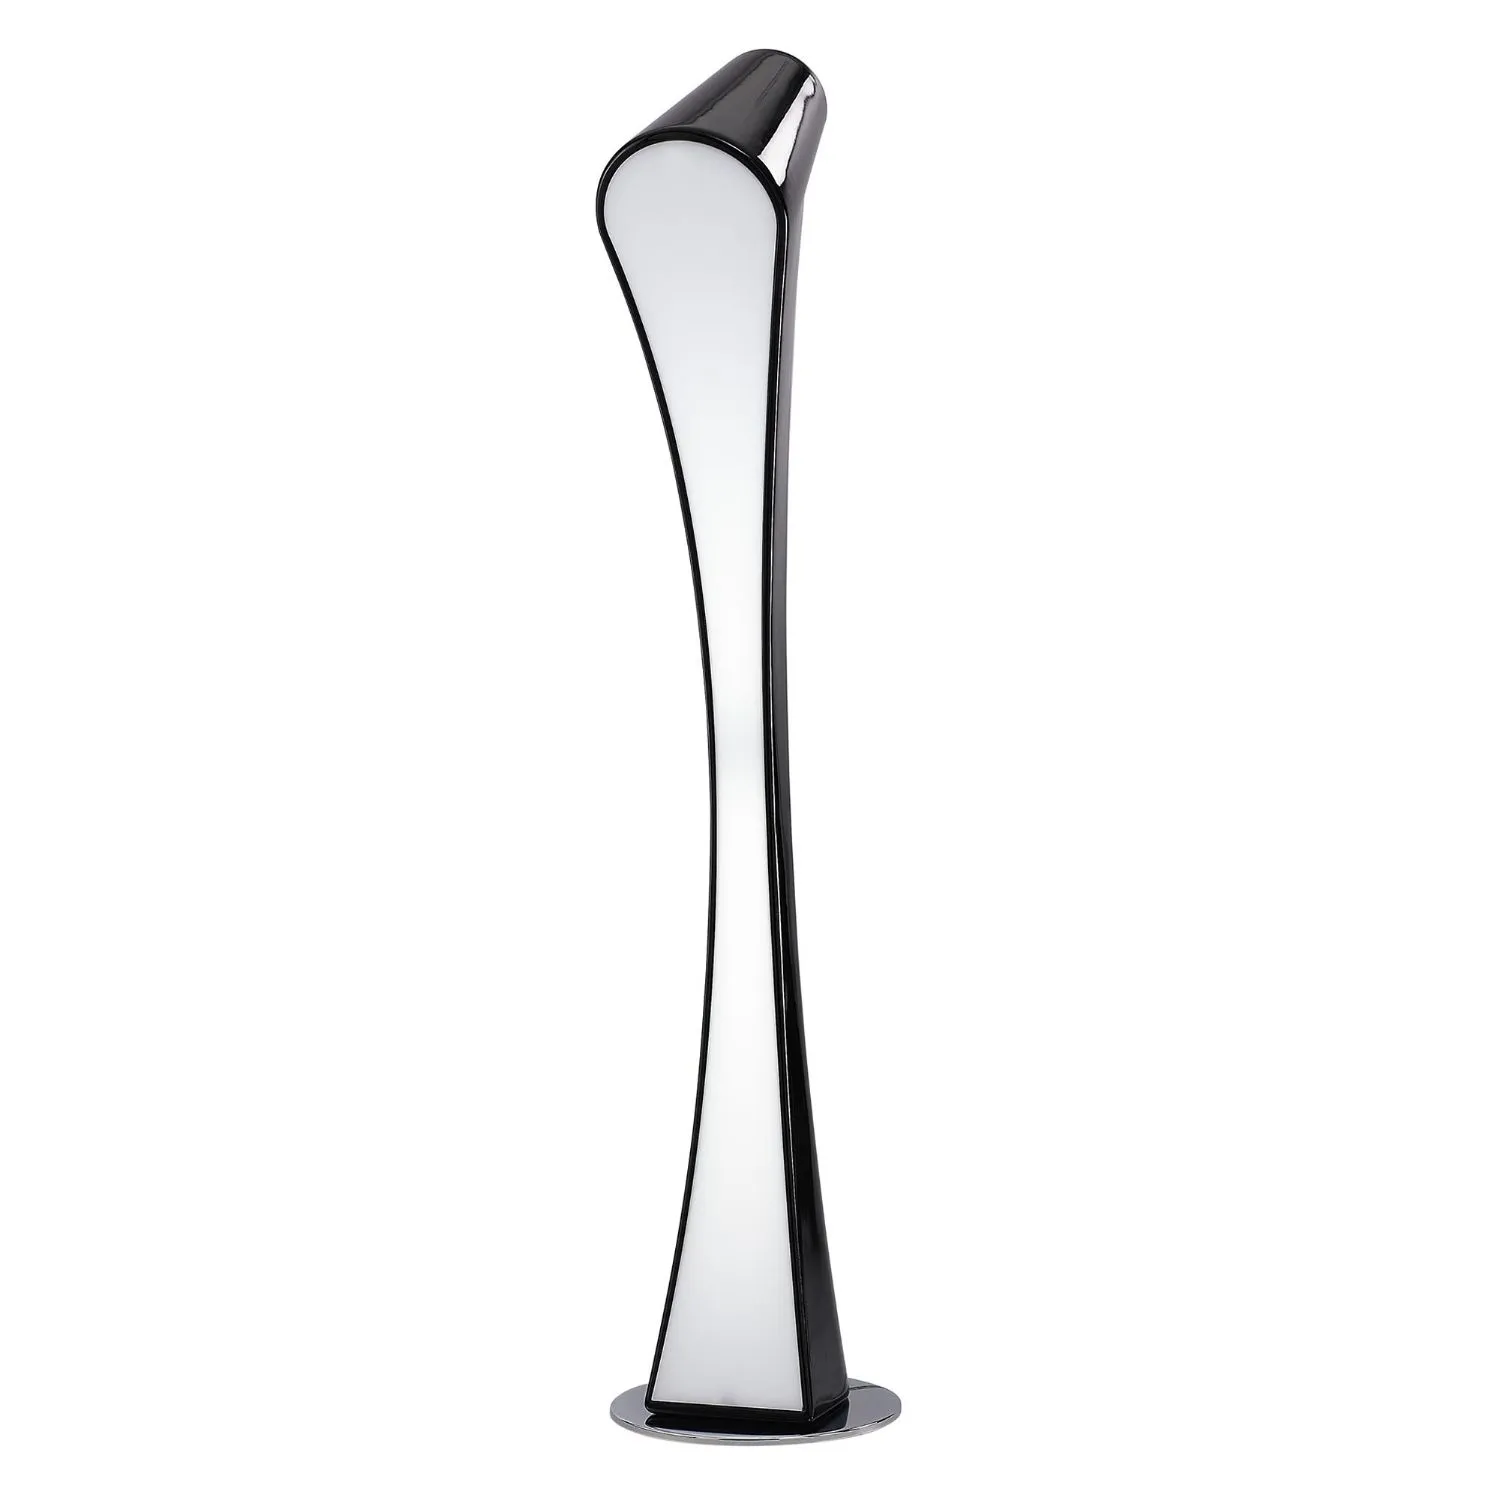 Ora Floor Lamp 2 Light T5, Gloss Black White Acrylic Polished Chrome COLLECTION ONLY, NOT LED CFL Compatible Item Weight: 17.4kg